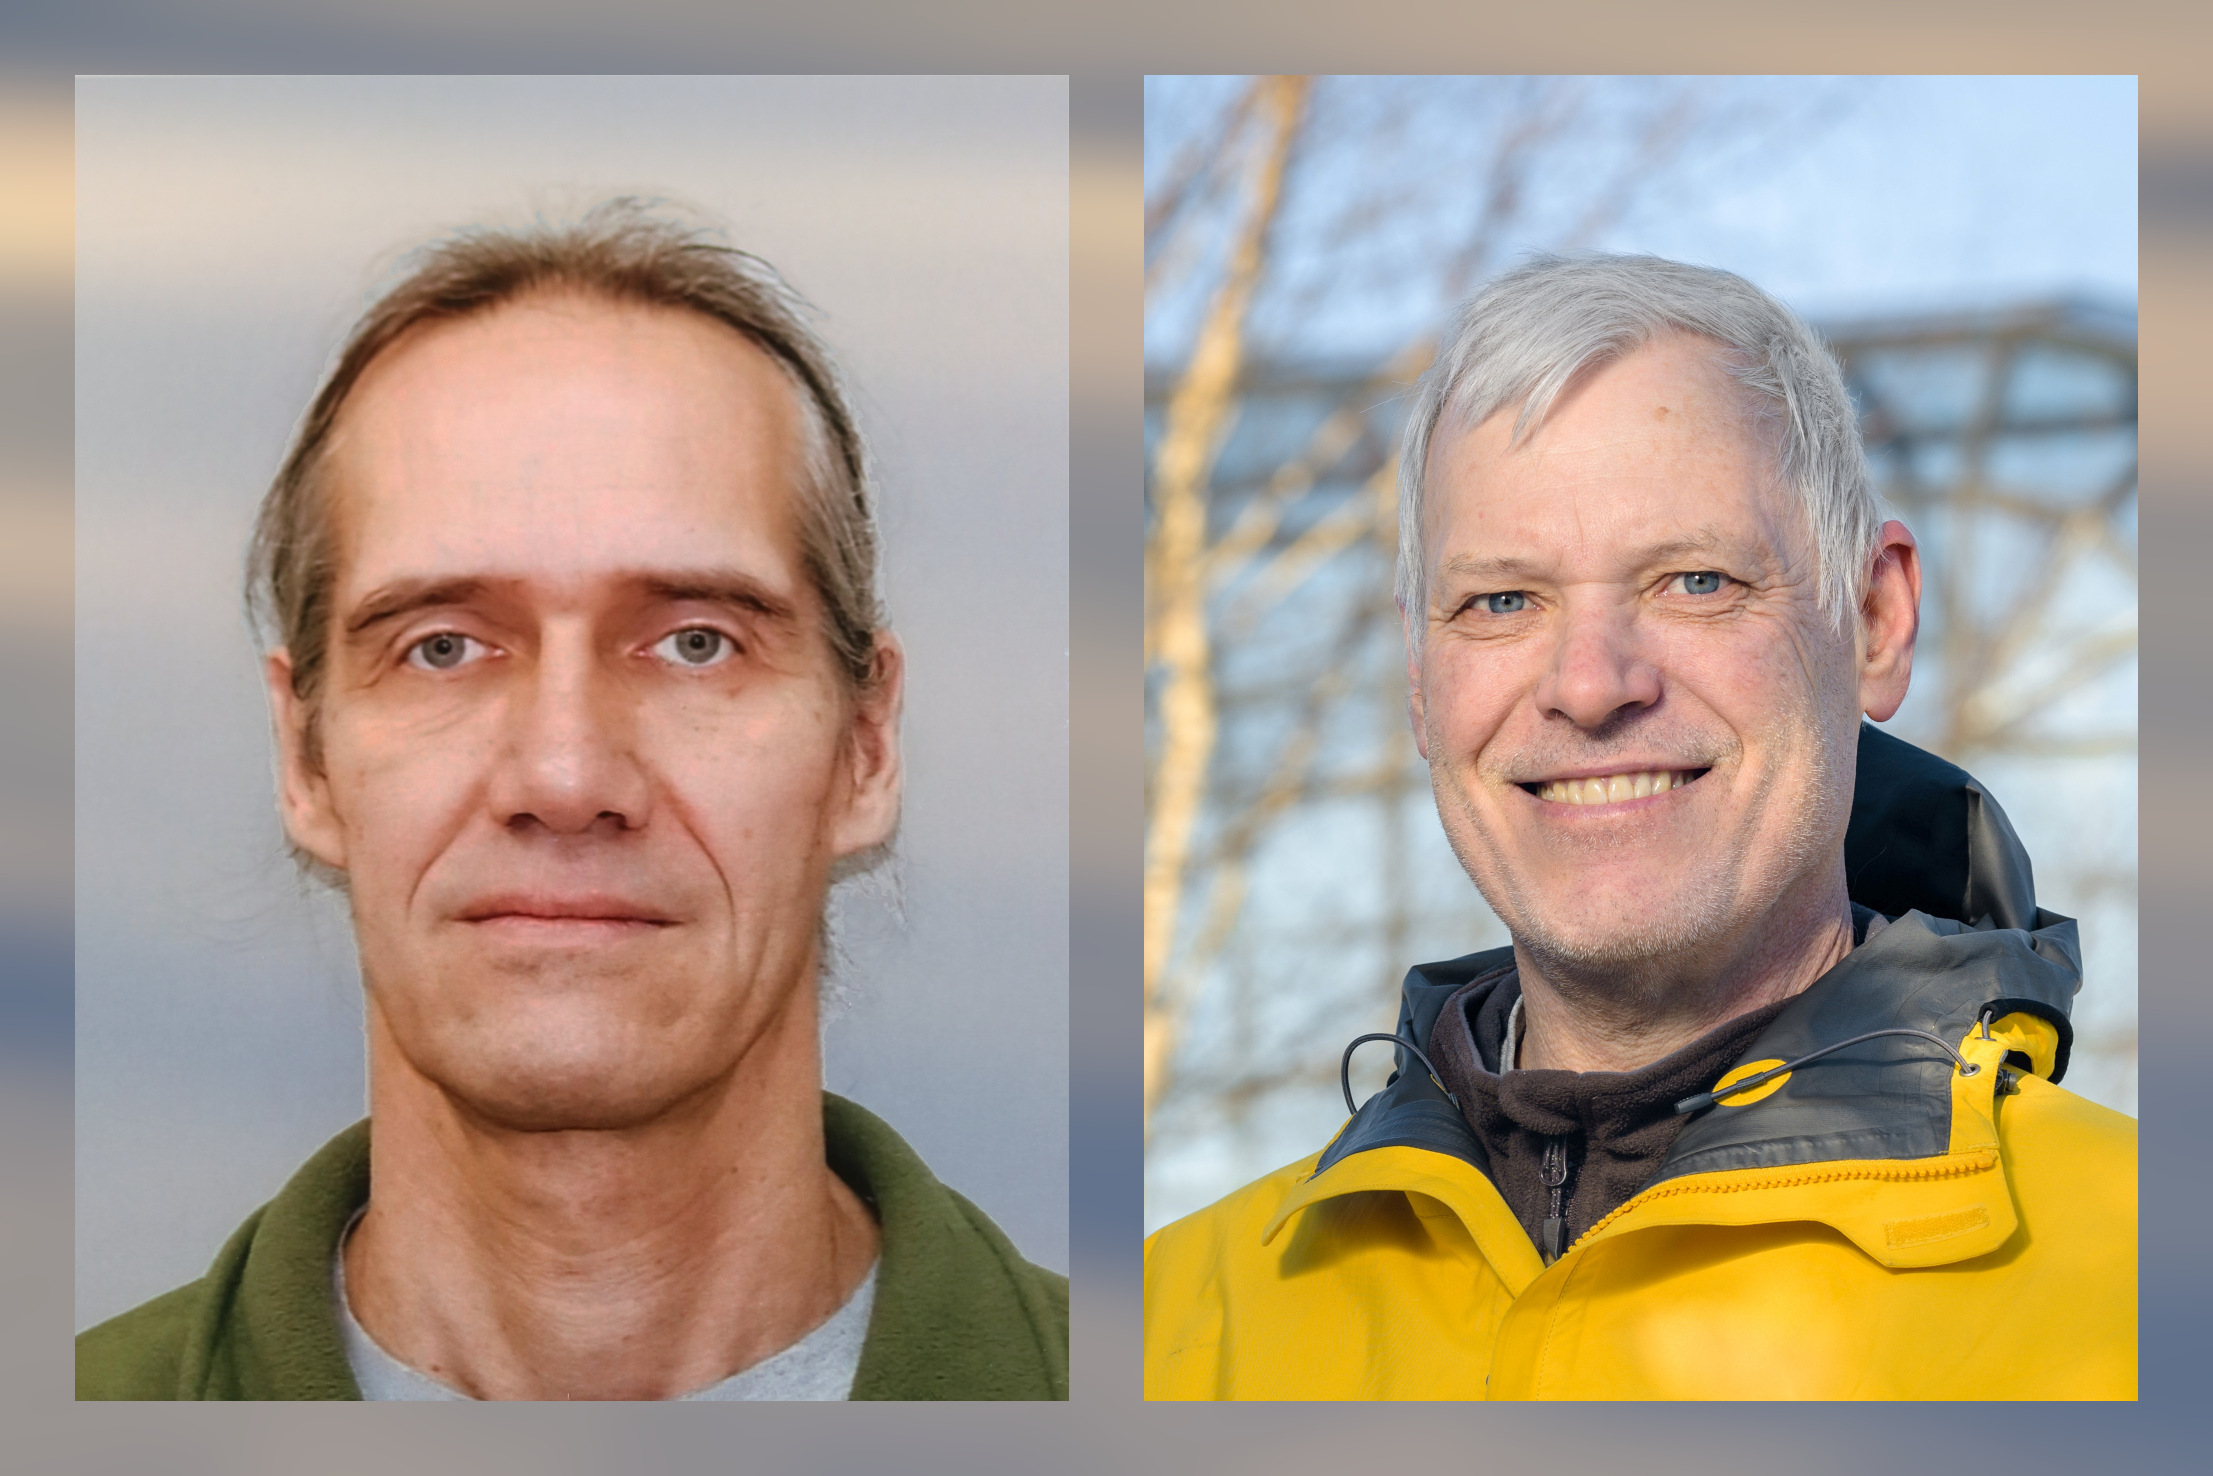 Ralf Greve (left) and John C. Moore (right), authors of the study. (Photo: Ralf Greve, John Moore)